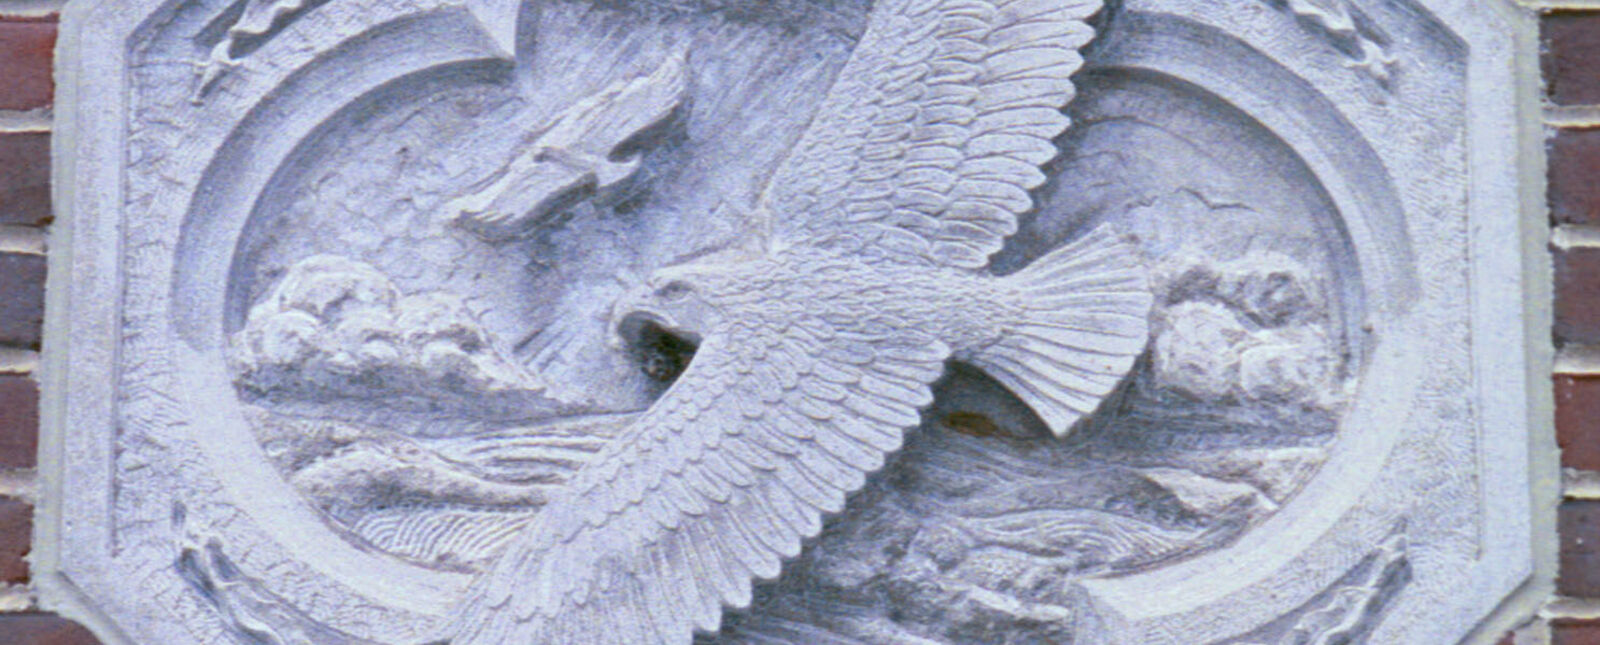 An octagon stone with an engraving of an eagle and scenery is mounted on a brick wall